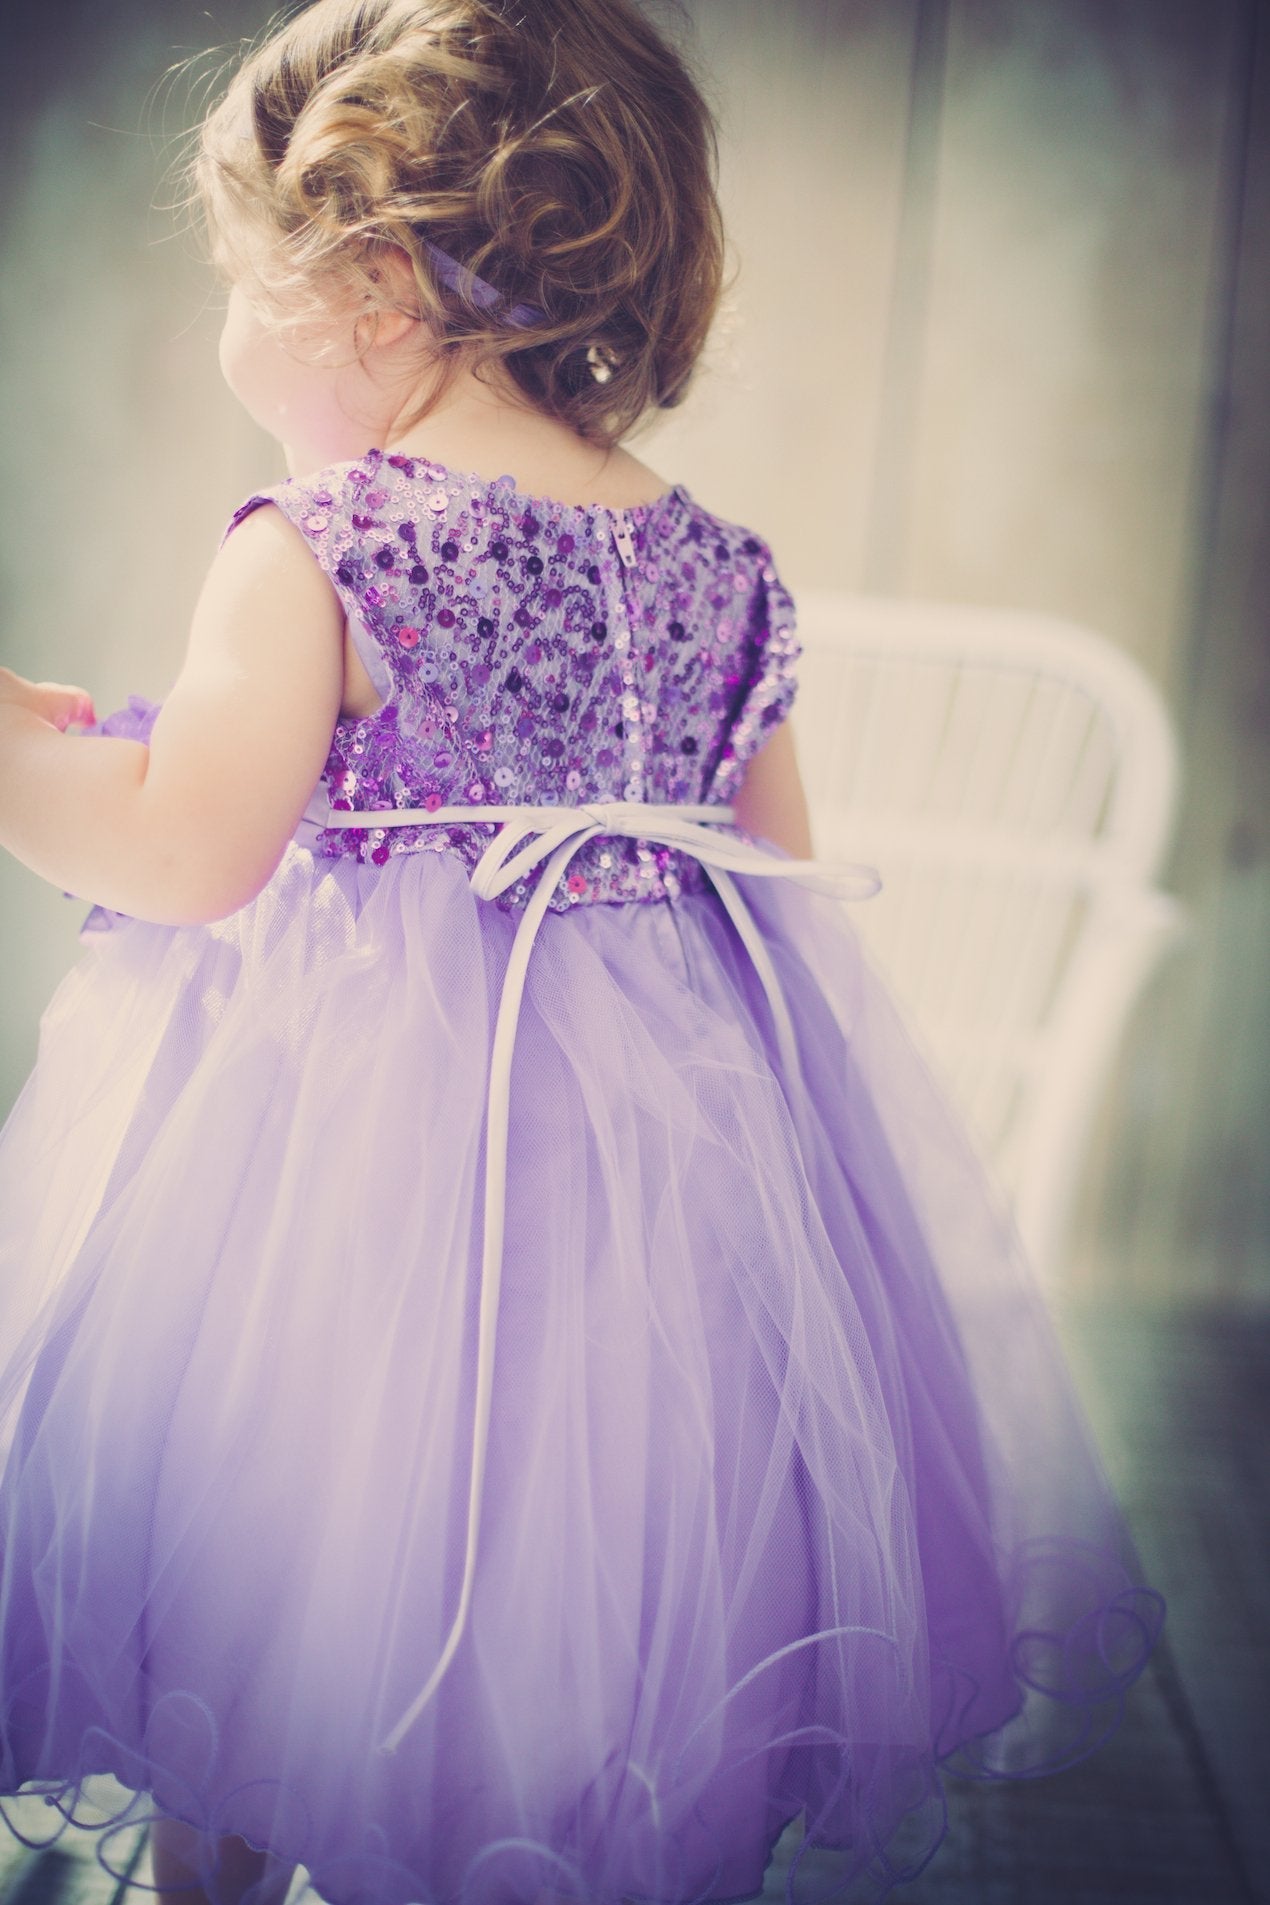 Dress - Sequin Baby Party Dress